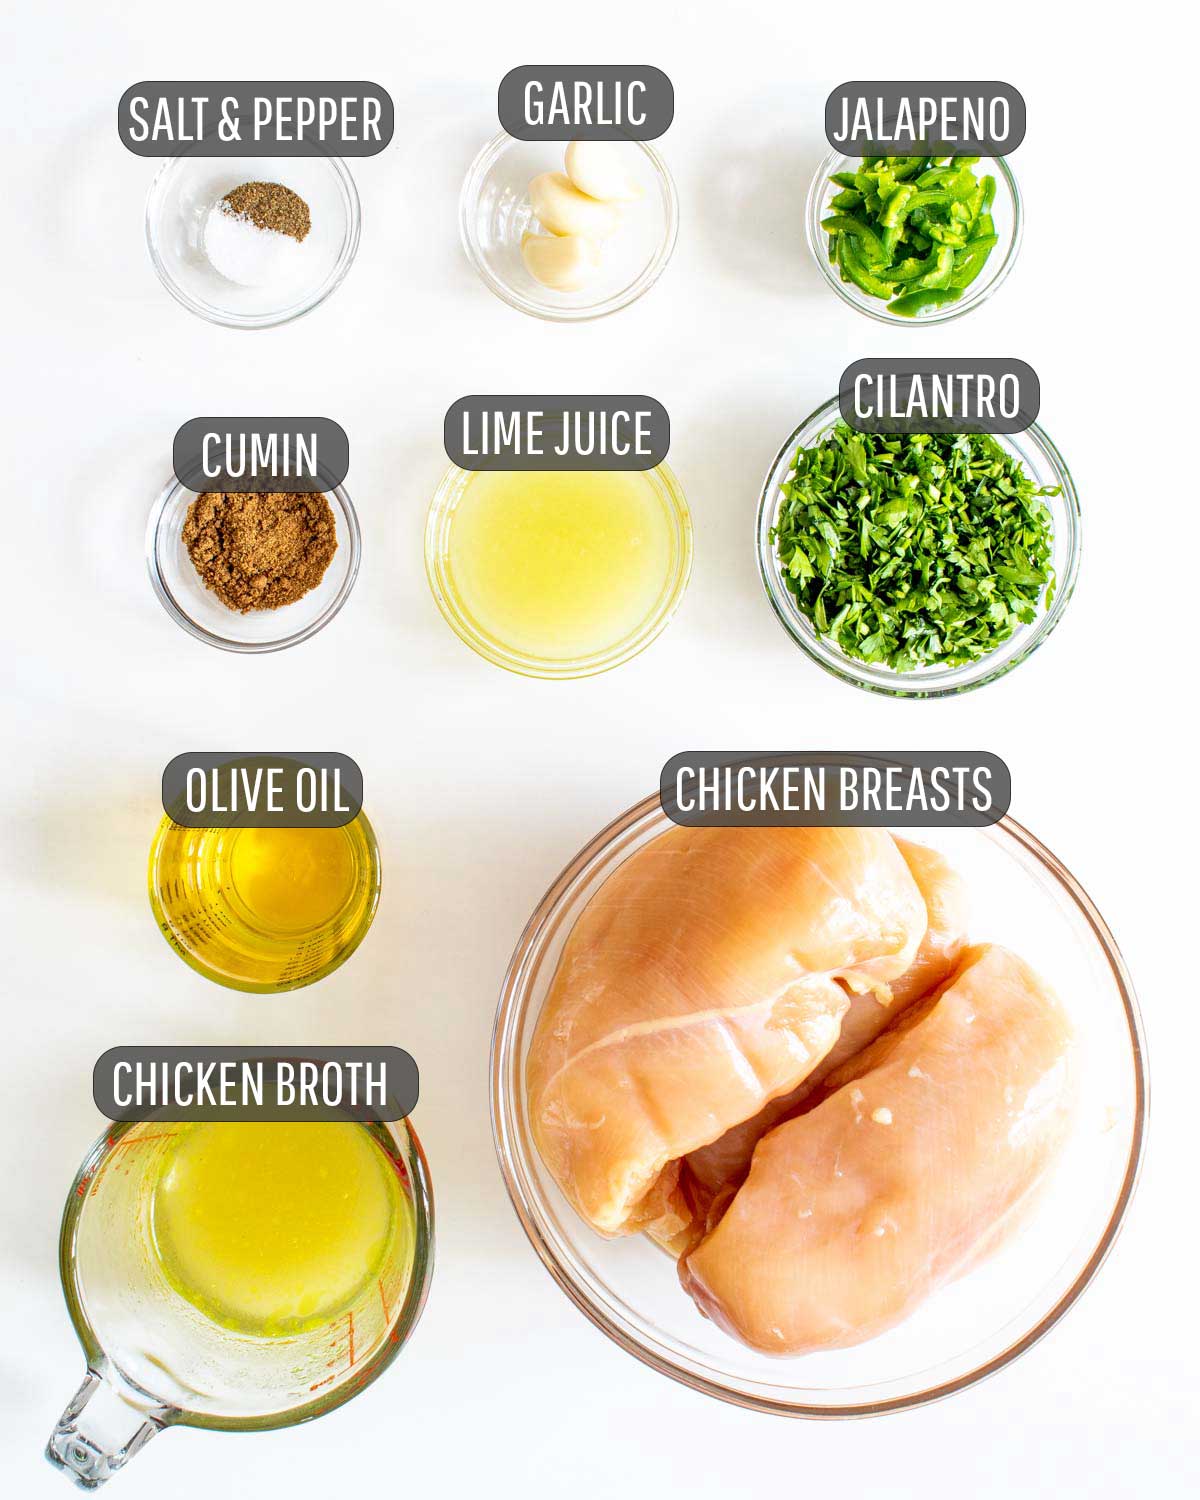 ingredients needed to make cilantro lime chicken in the crockpot.